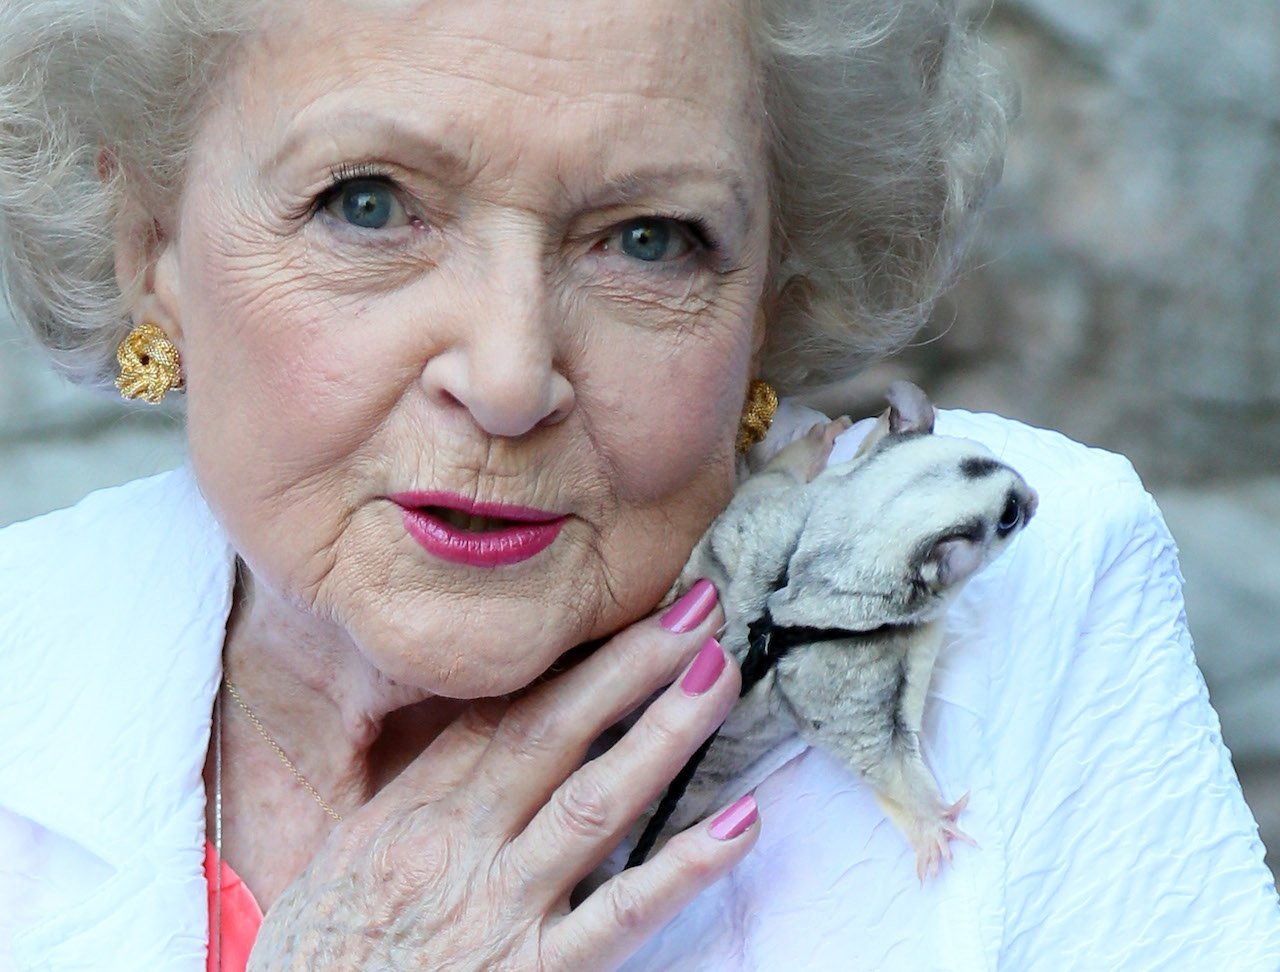 Betty White attends the Greater Los Angeles Zoo Association's (GLAZA) 45th Annual Beastly Ball at the Los Angeles Zoo on June 20, 2015, in Los Angeles, California.